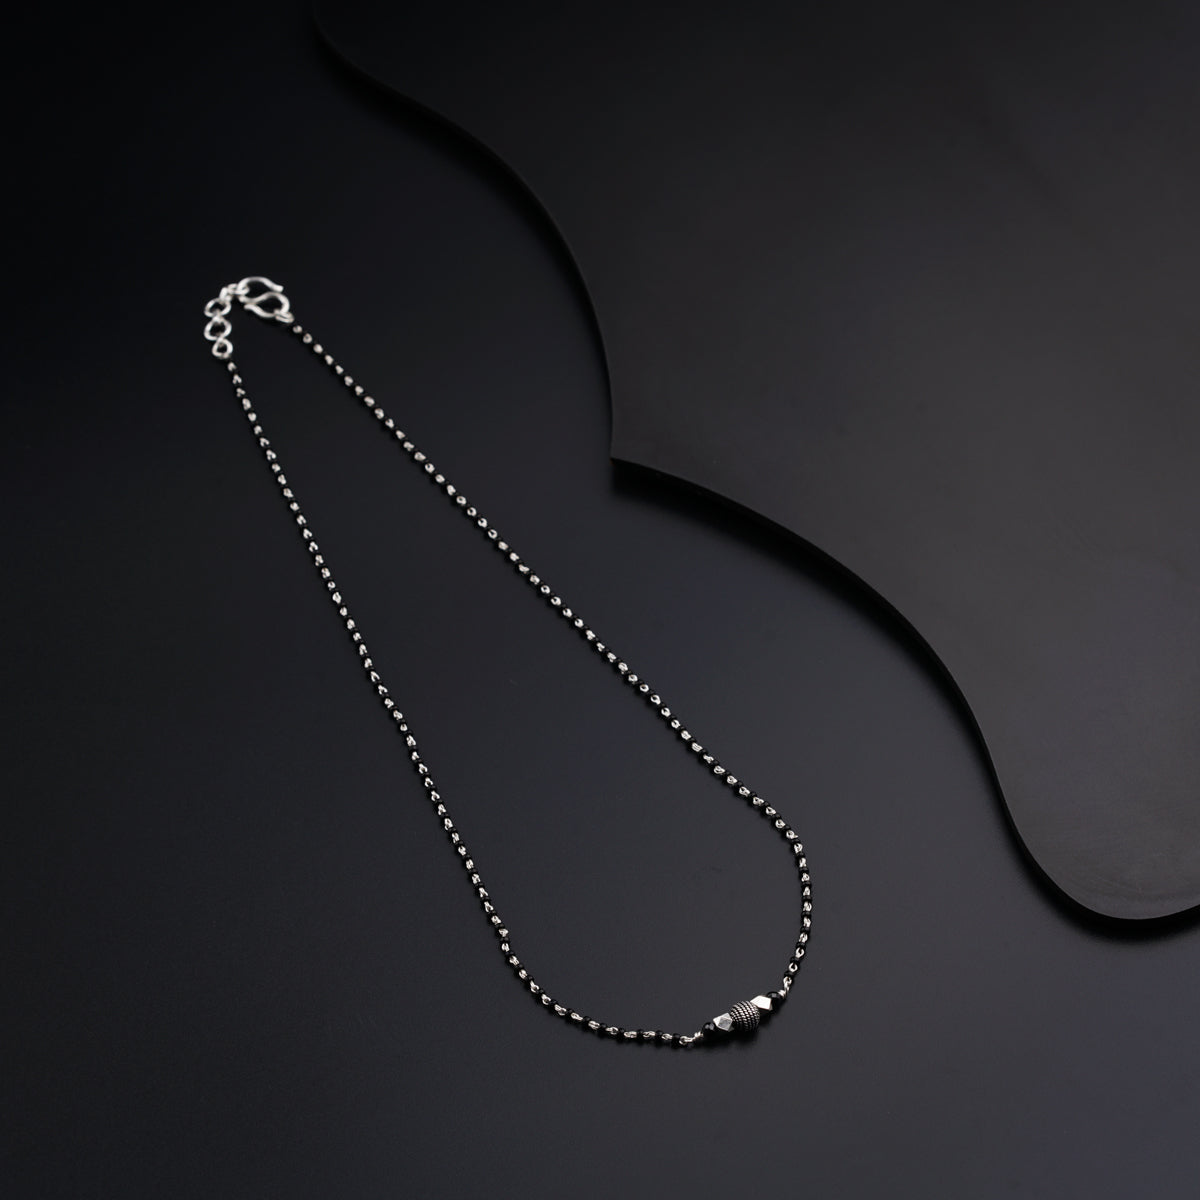 a silver necklace with a ball chain on a black background